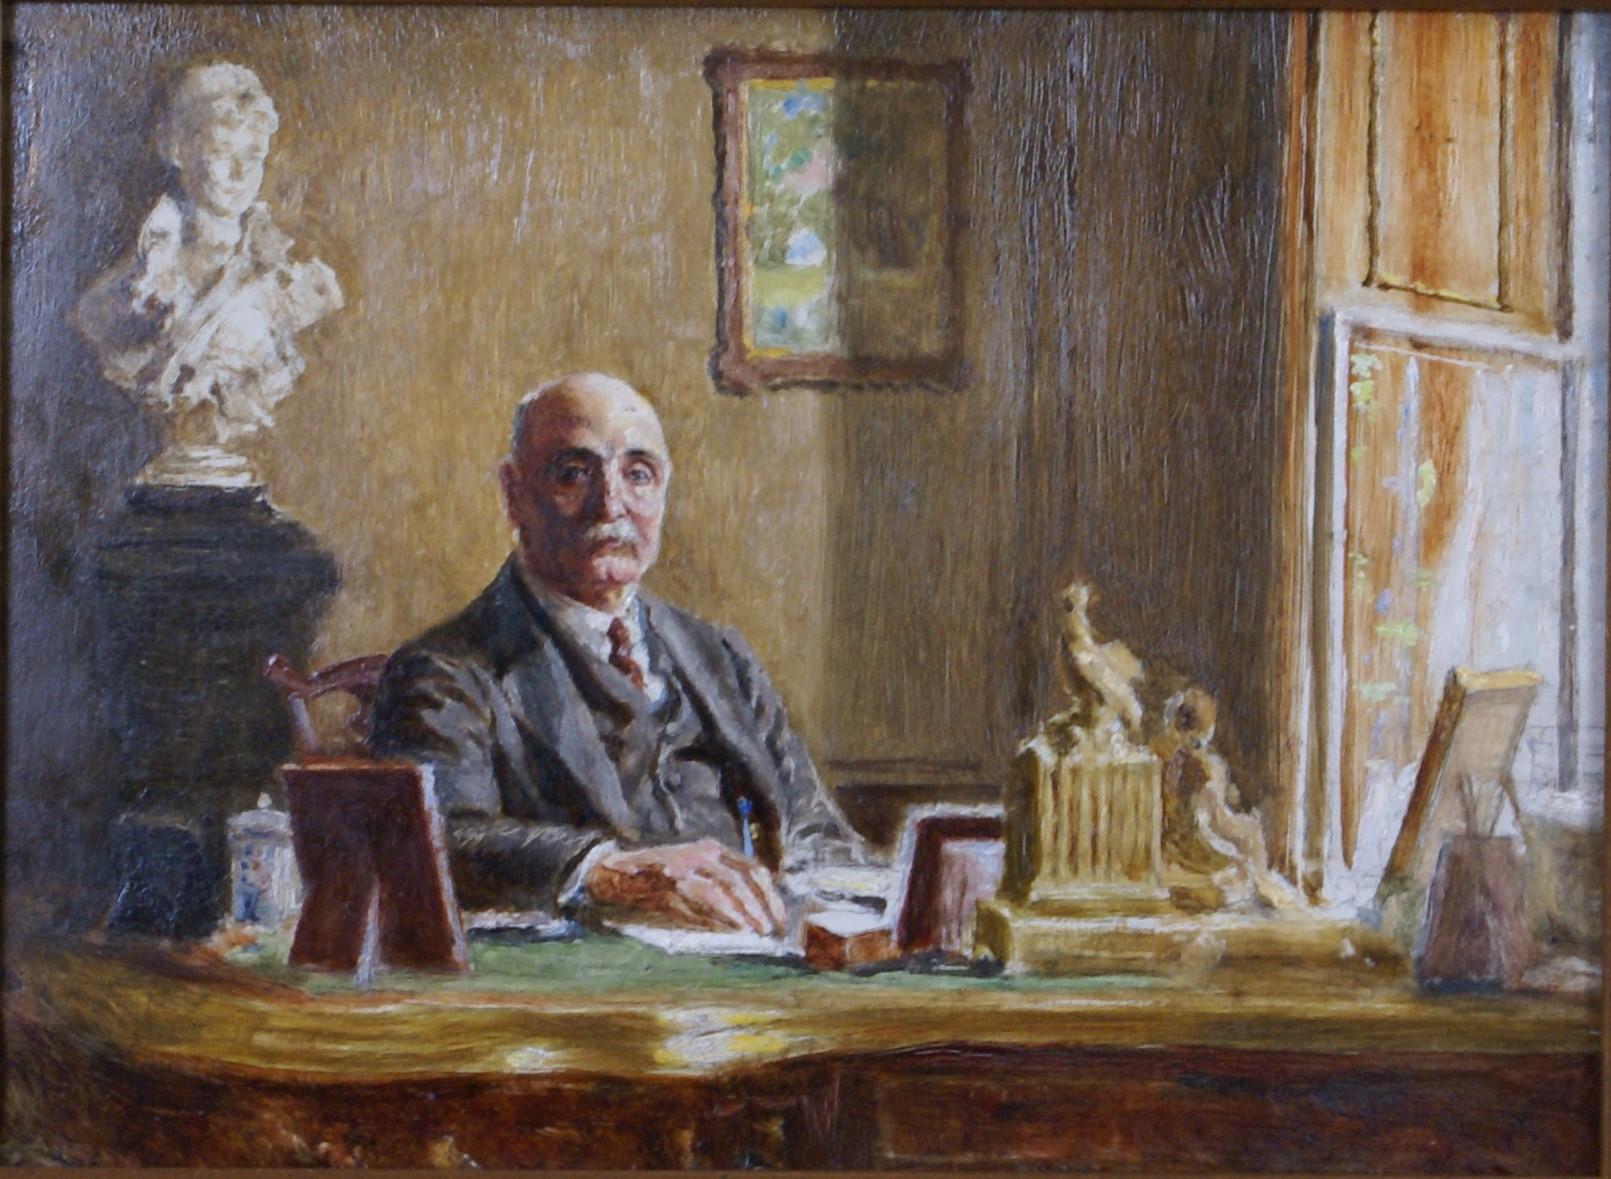 J.P. Morgan - Painting by Unknown